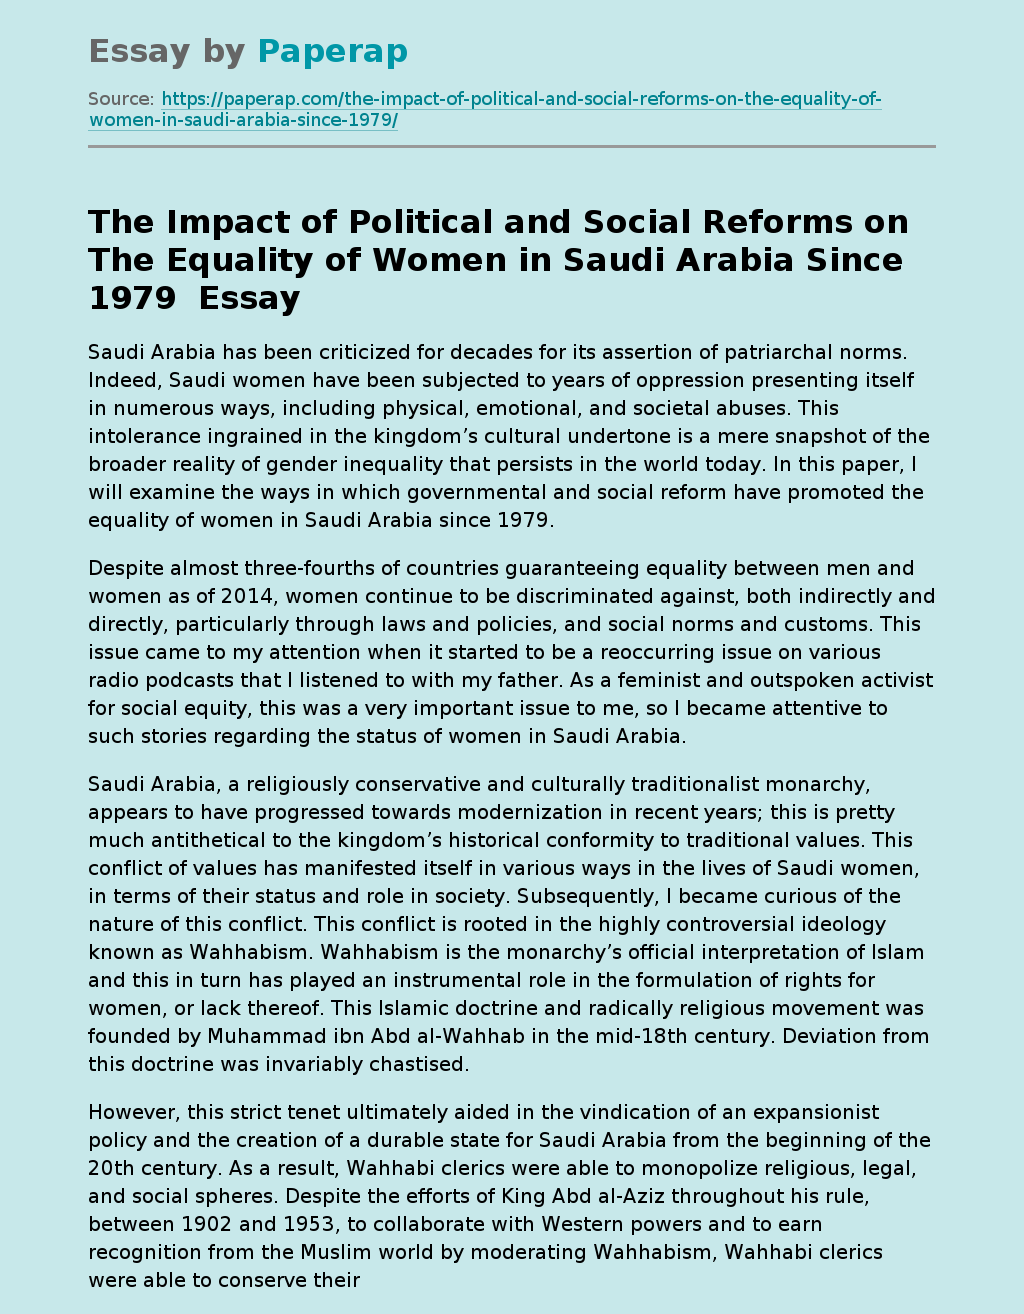 The Impact of Political and Social Reforms on The Equality of Women in Saudi Arabia Since 1979 